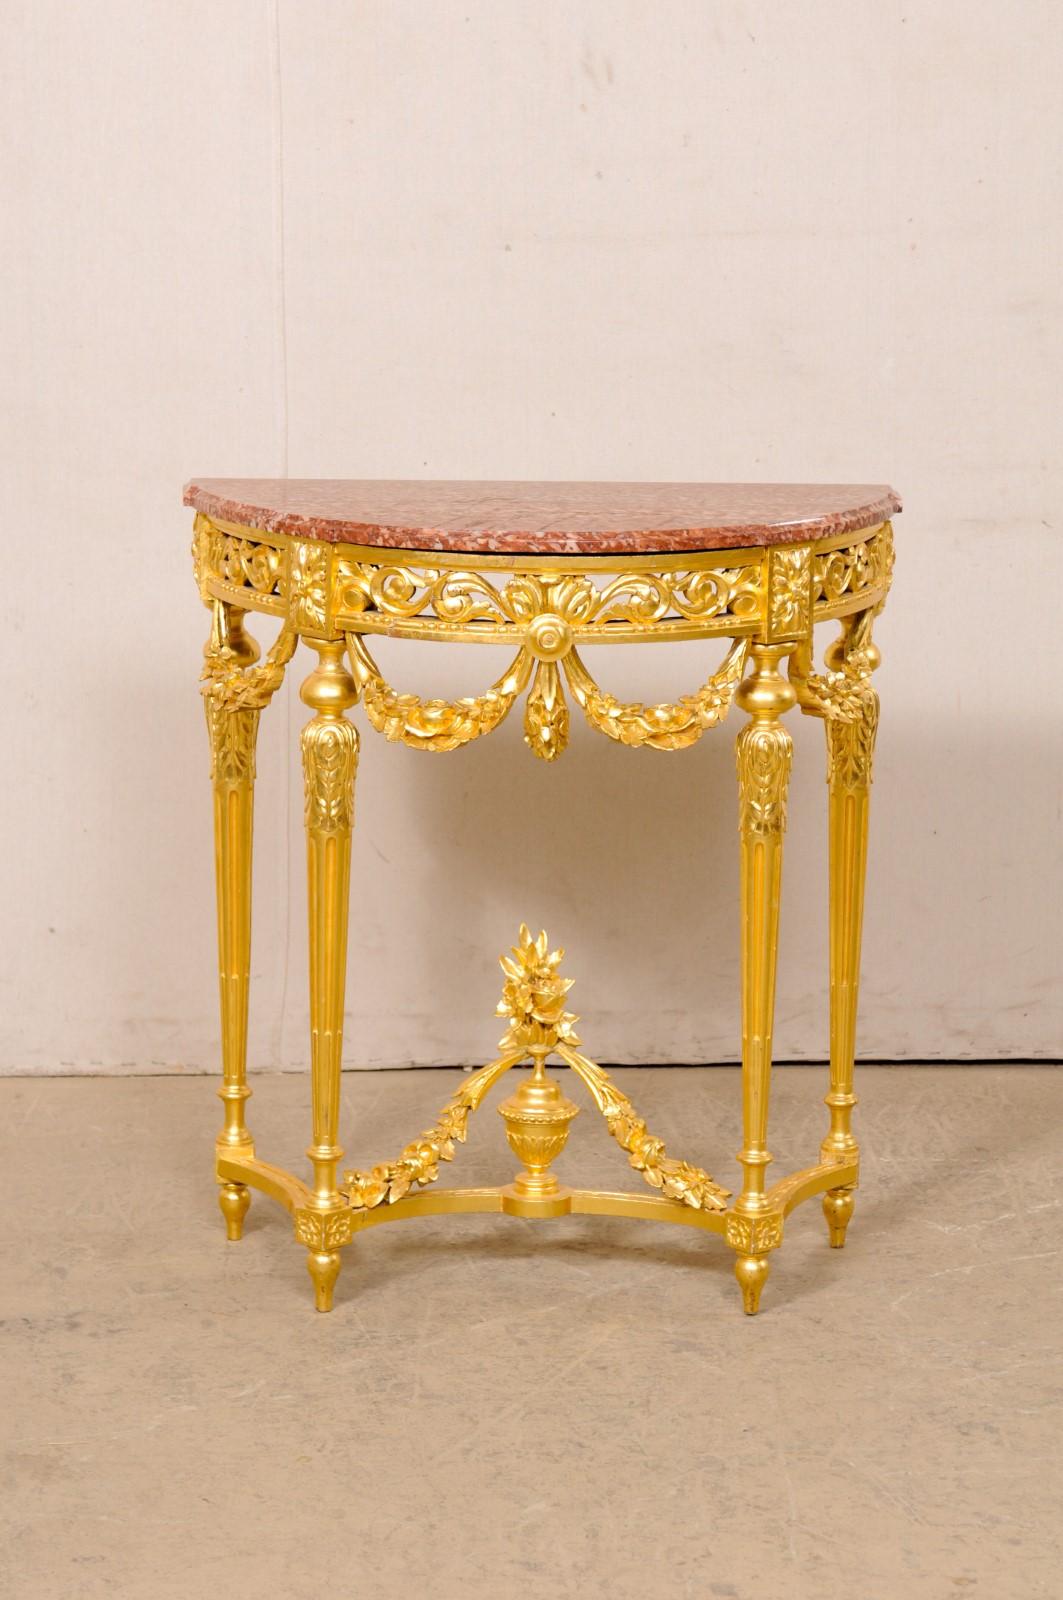 A French Neoclassical petite console table, with marble top and carved urn finial accent at underside, from the 19th century. This antique table from France features a half-moon shaped marble top with flattened backside (so that it can rest